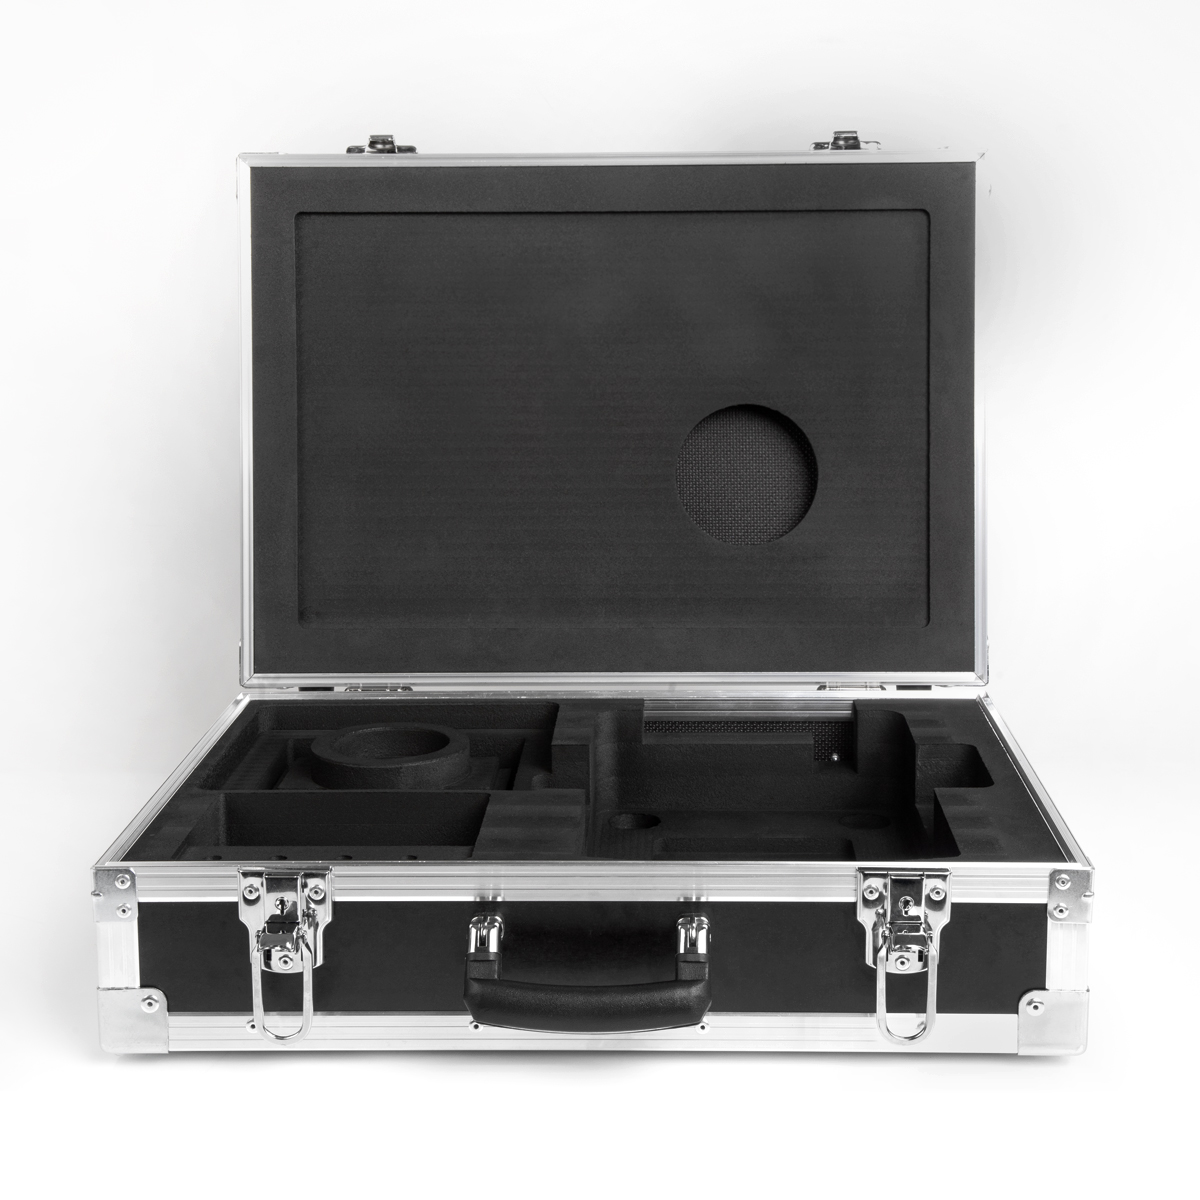 Transport Case for PS, WLC (A1 and A2) Balances